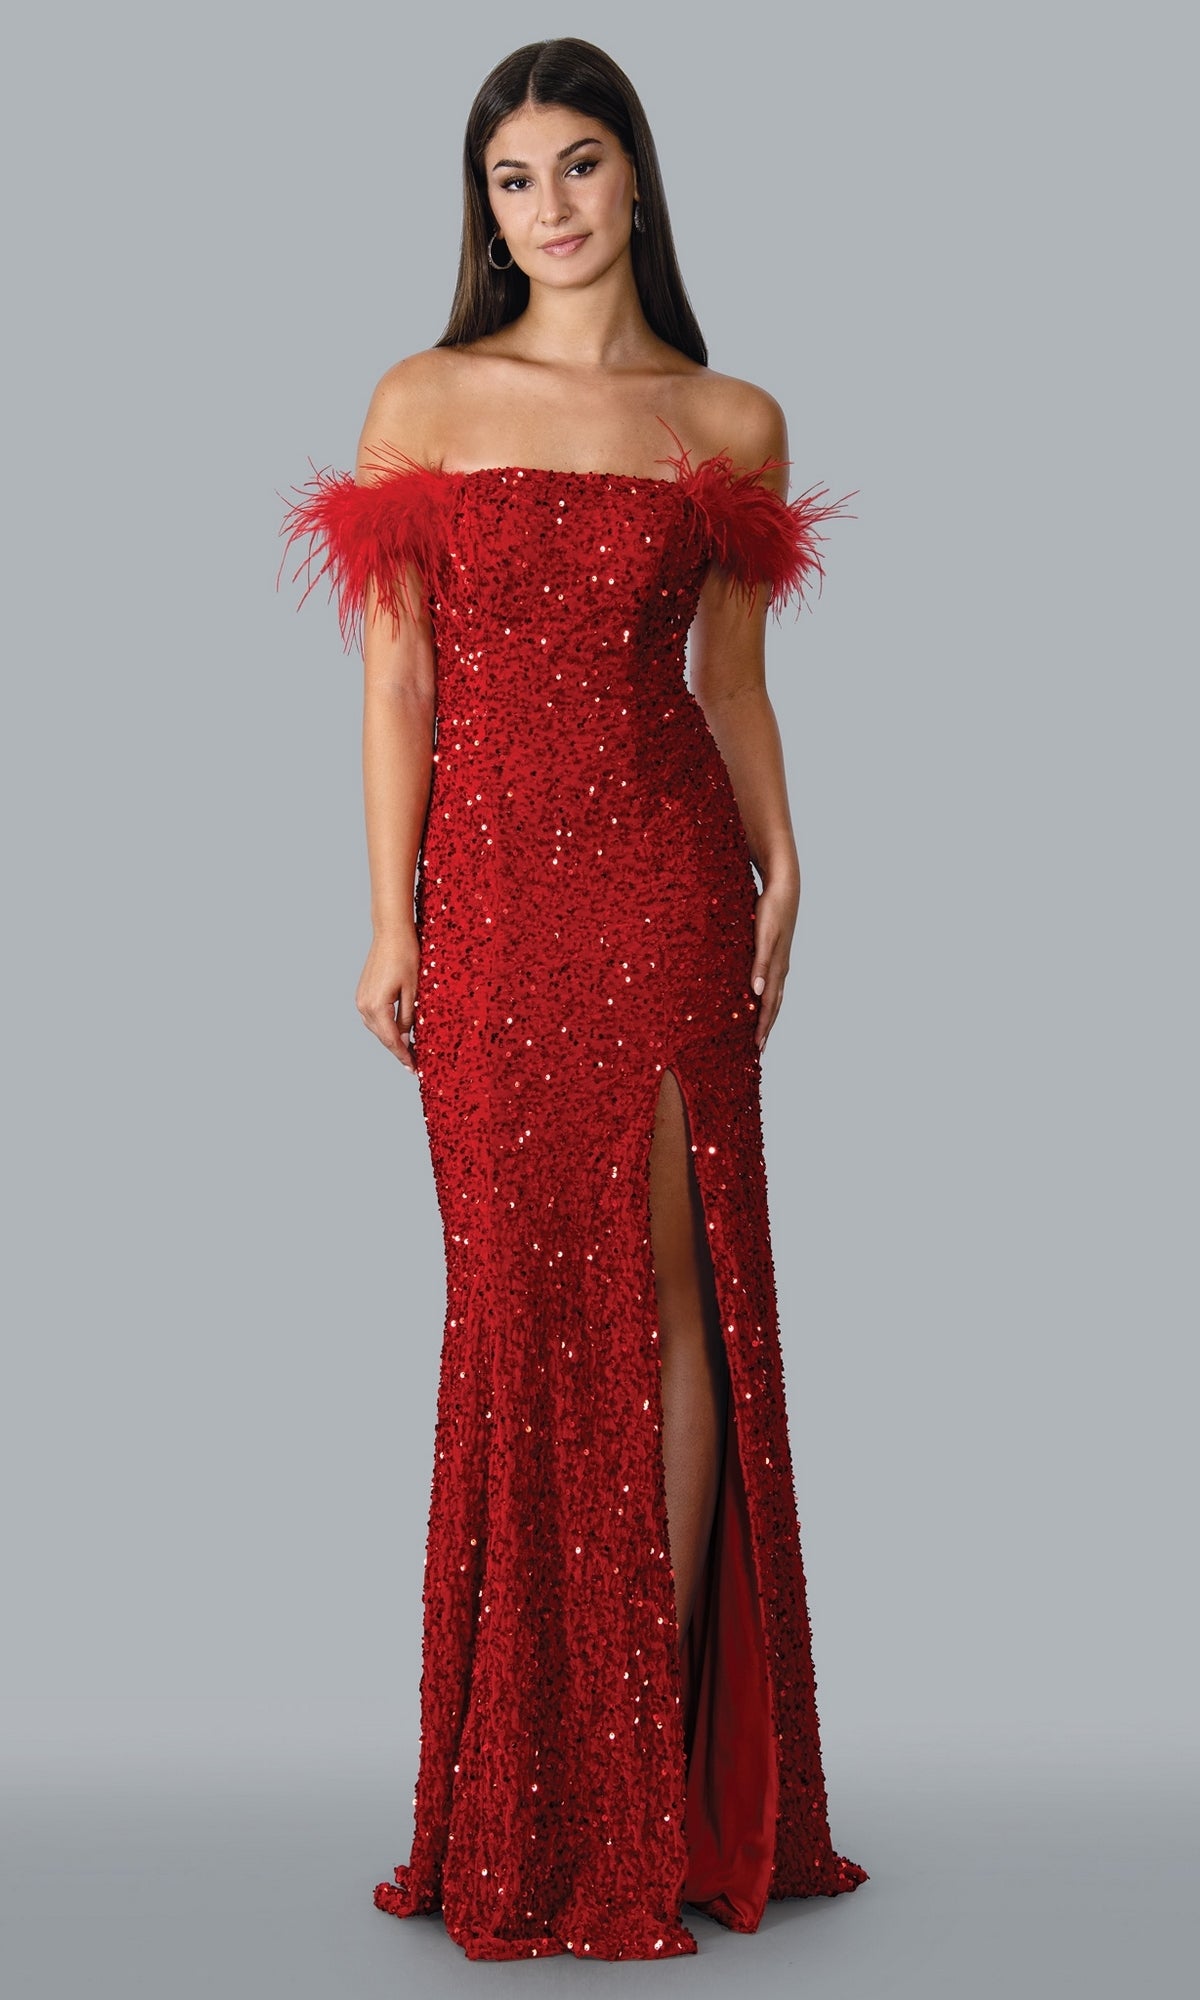 Feathered Off-Shoulder Long Sequin Prom Gown -PromGirl